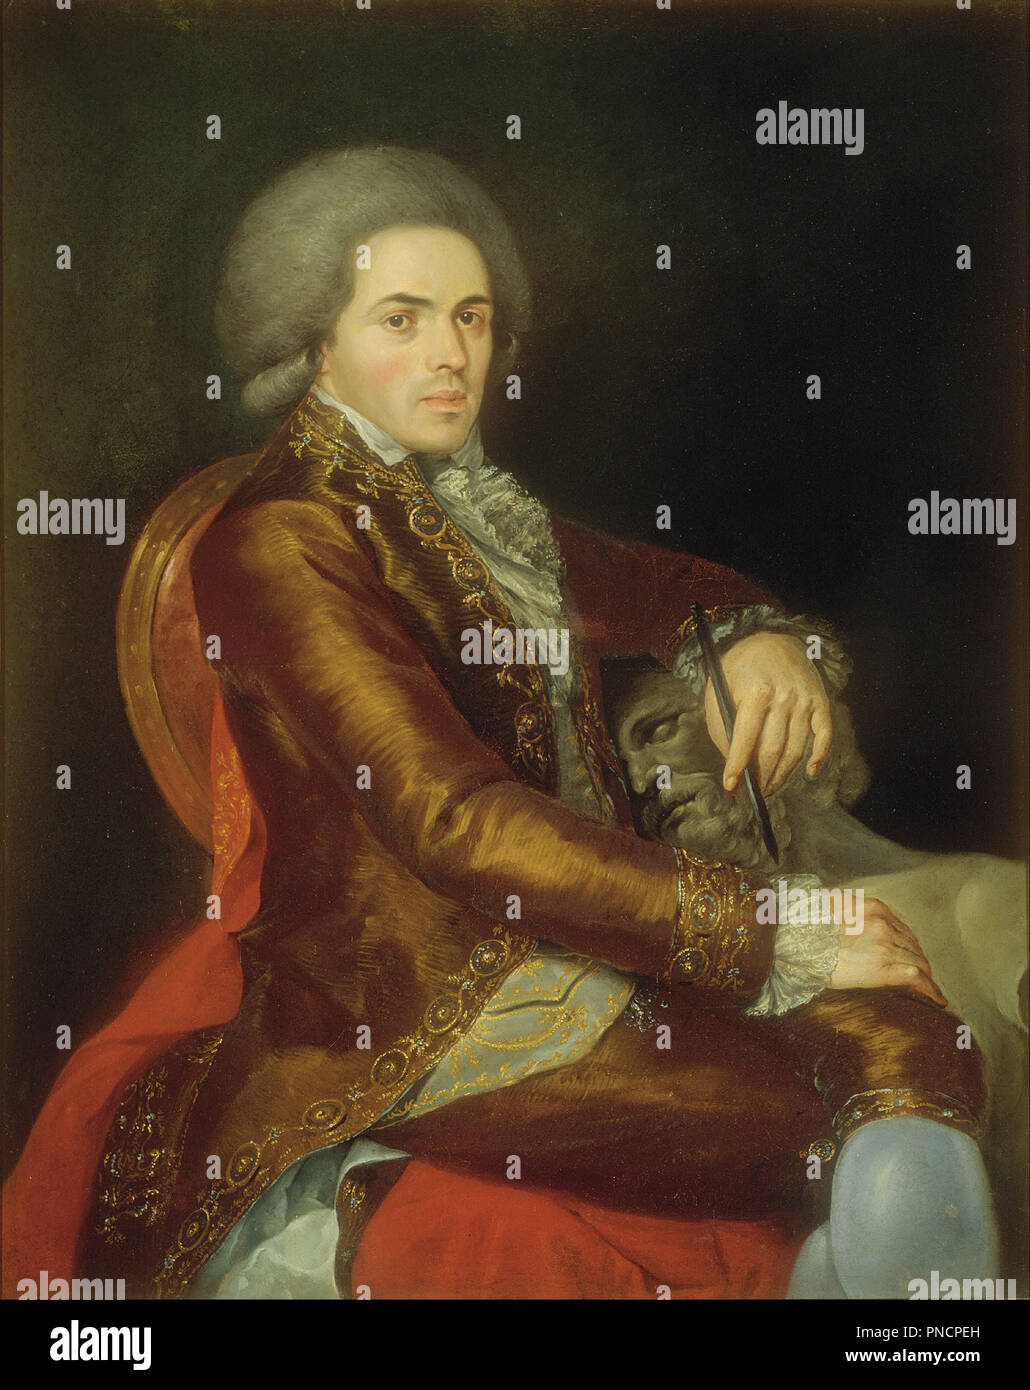 Portrait of Manuel Tolsá. Painting. Oil on canvas. Height: 1,030 mm (40.55 in); Width: 820 mm (32.28 in). Author: Rafael Ximeno y Planes. Jimeno y Planes, Rafael. Stock Photo